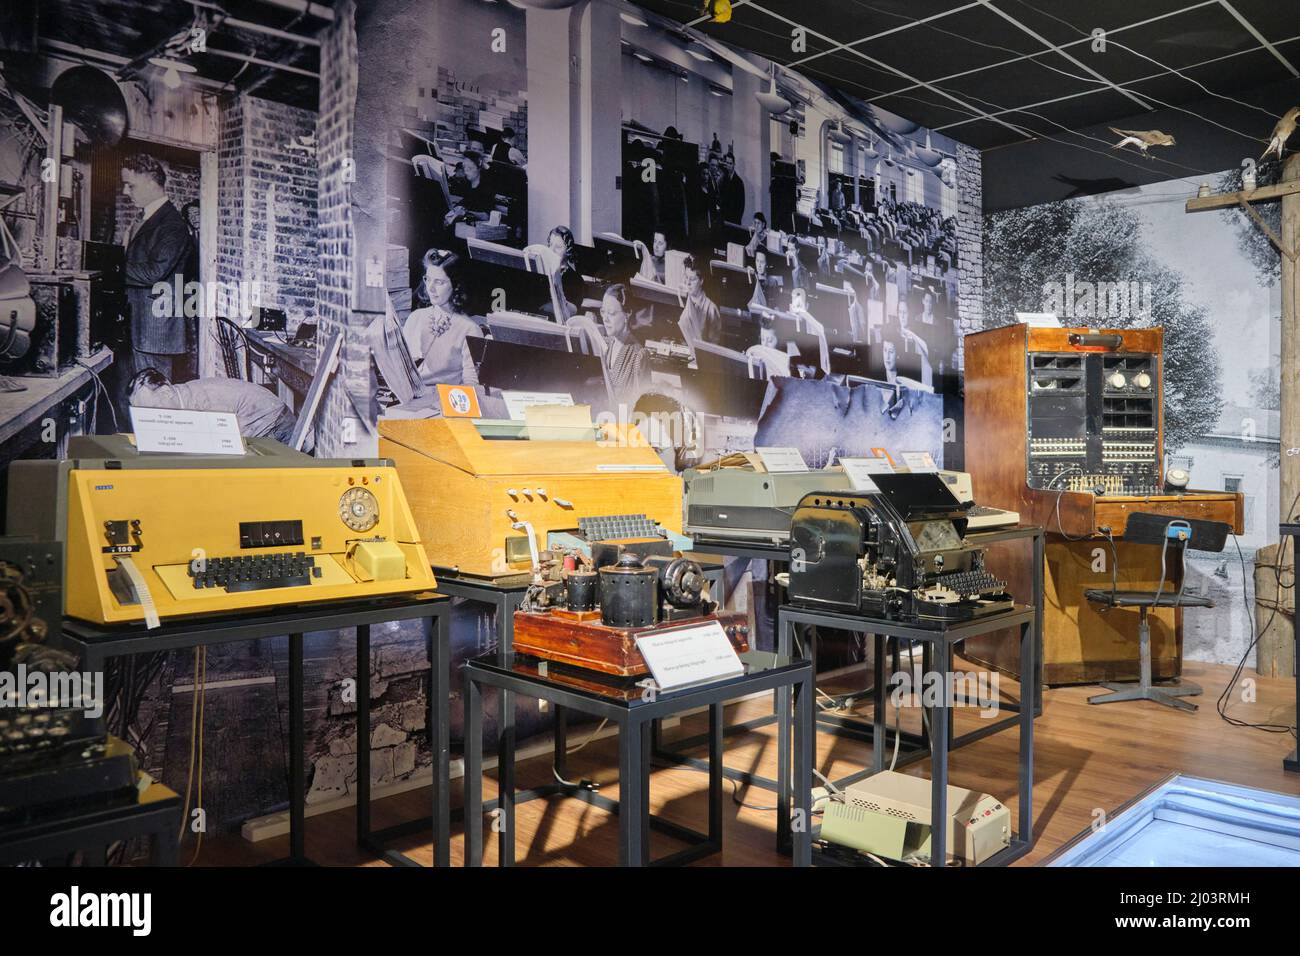 A collection of old Russian, Soviet, communist telex machines and telephone equipment. At the Museum of Communication in Tashkent, Uzbekistan. Stock Photo